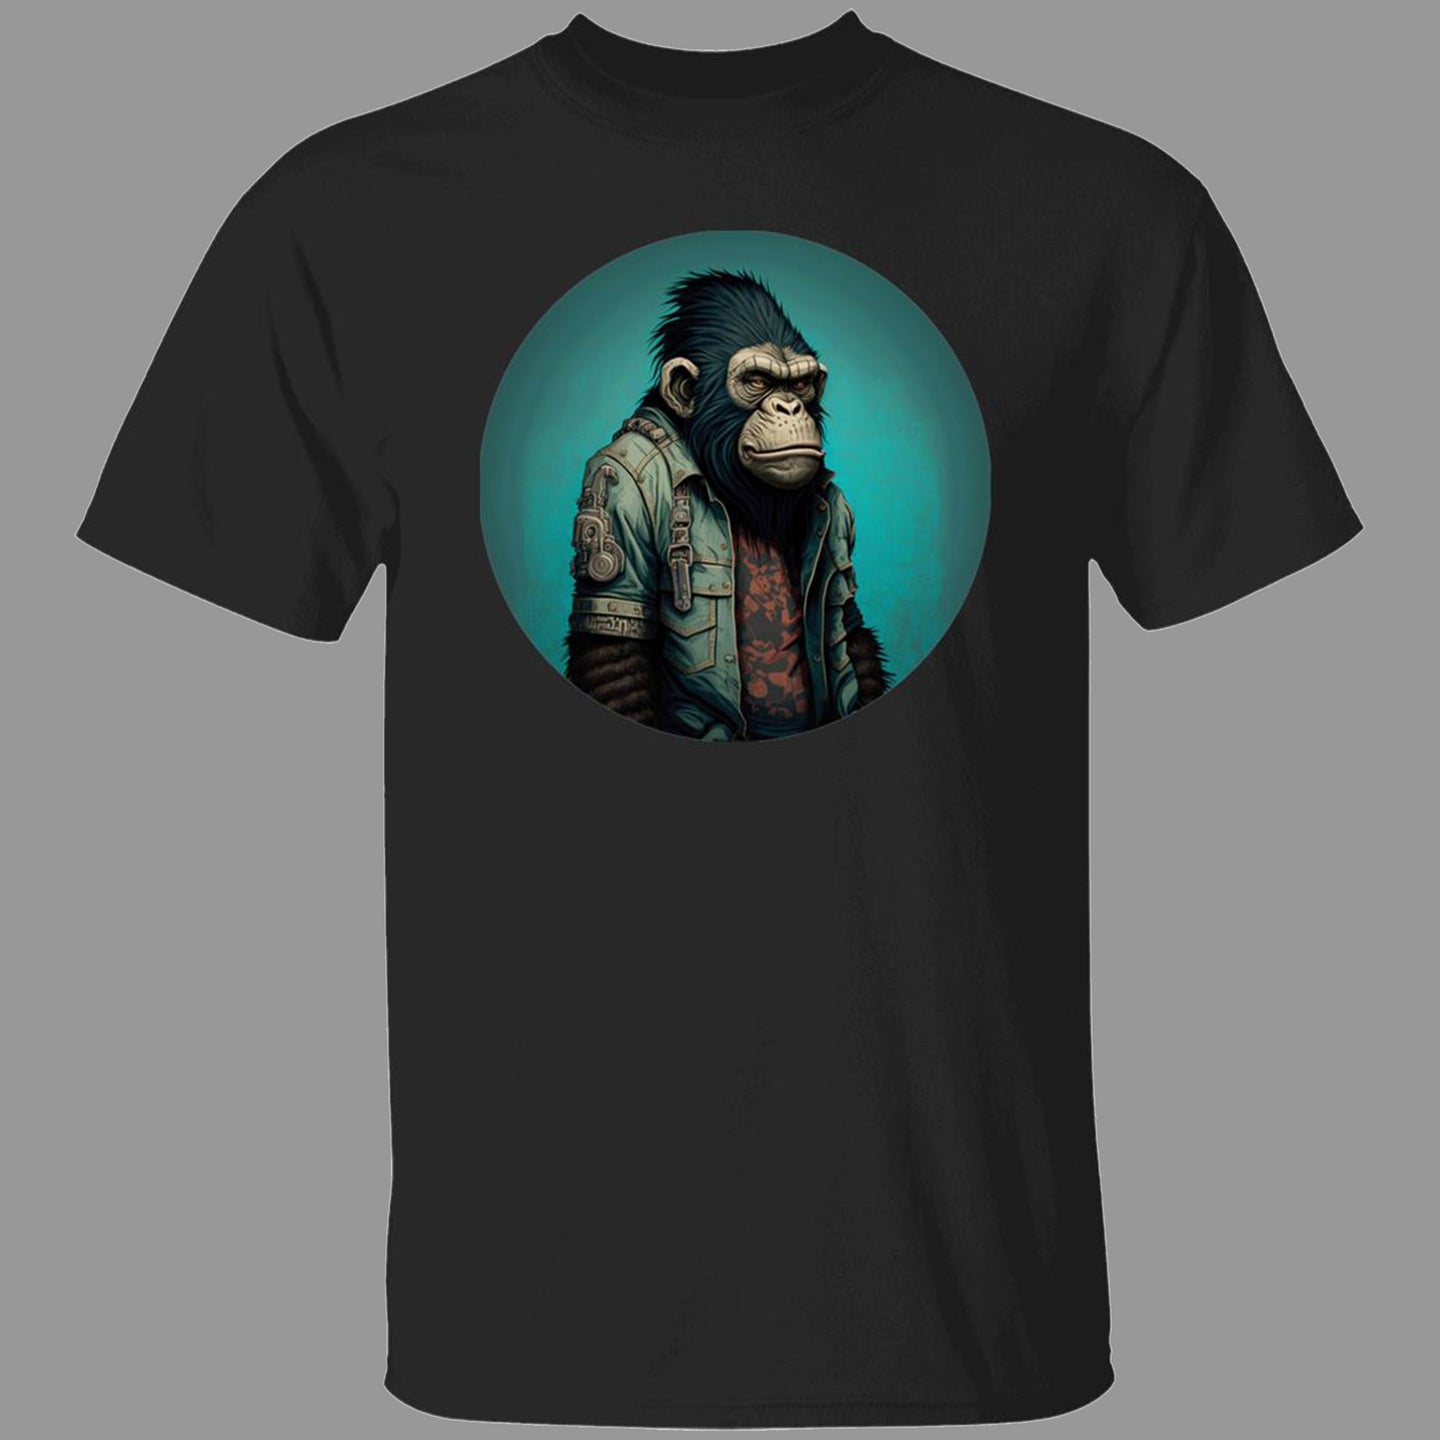 Black tee with comic image of a gorilla wearing blue jean jacket on blue background